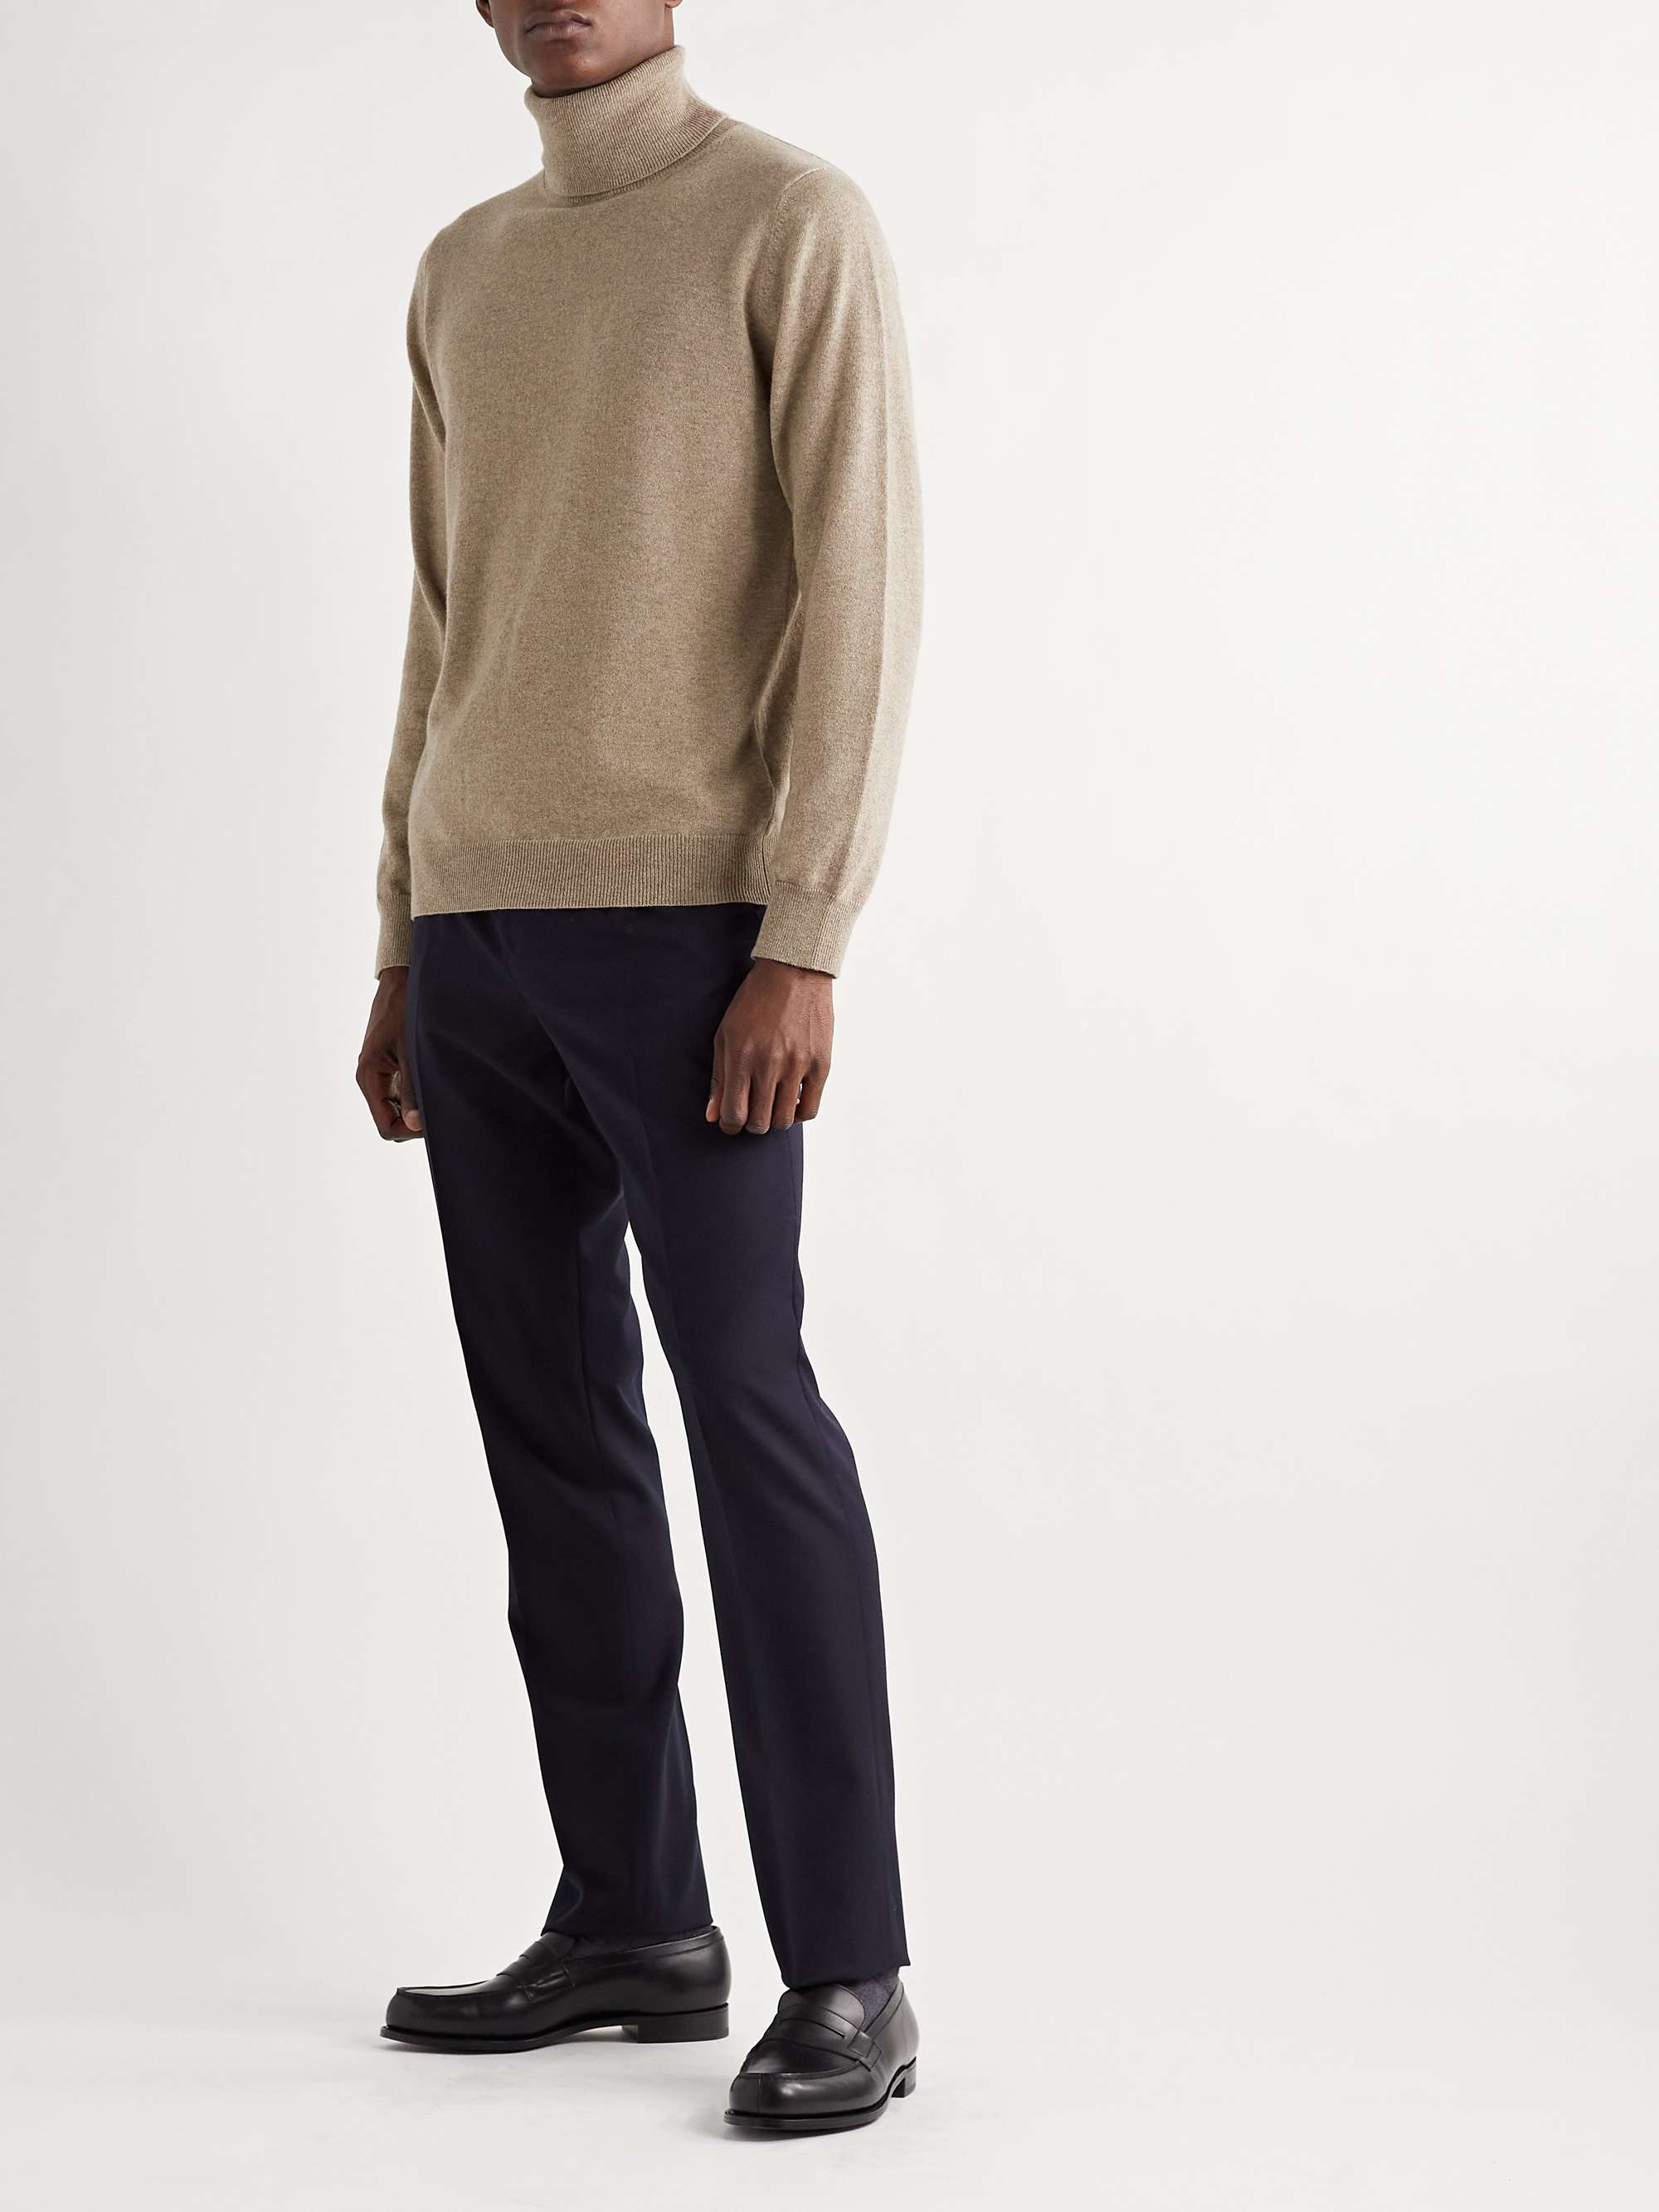 PAUL SMITH Cashmere Rollneck Sweater